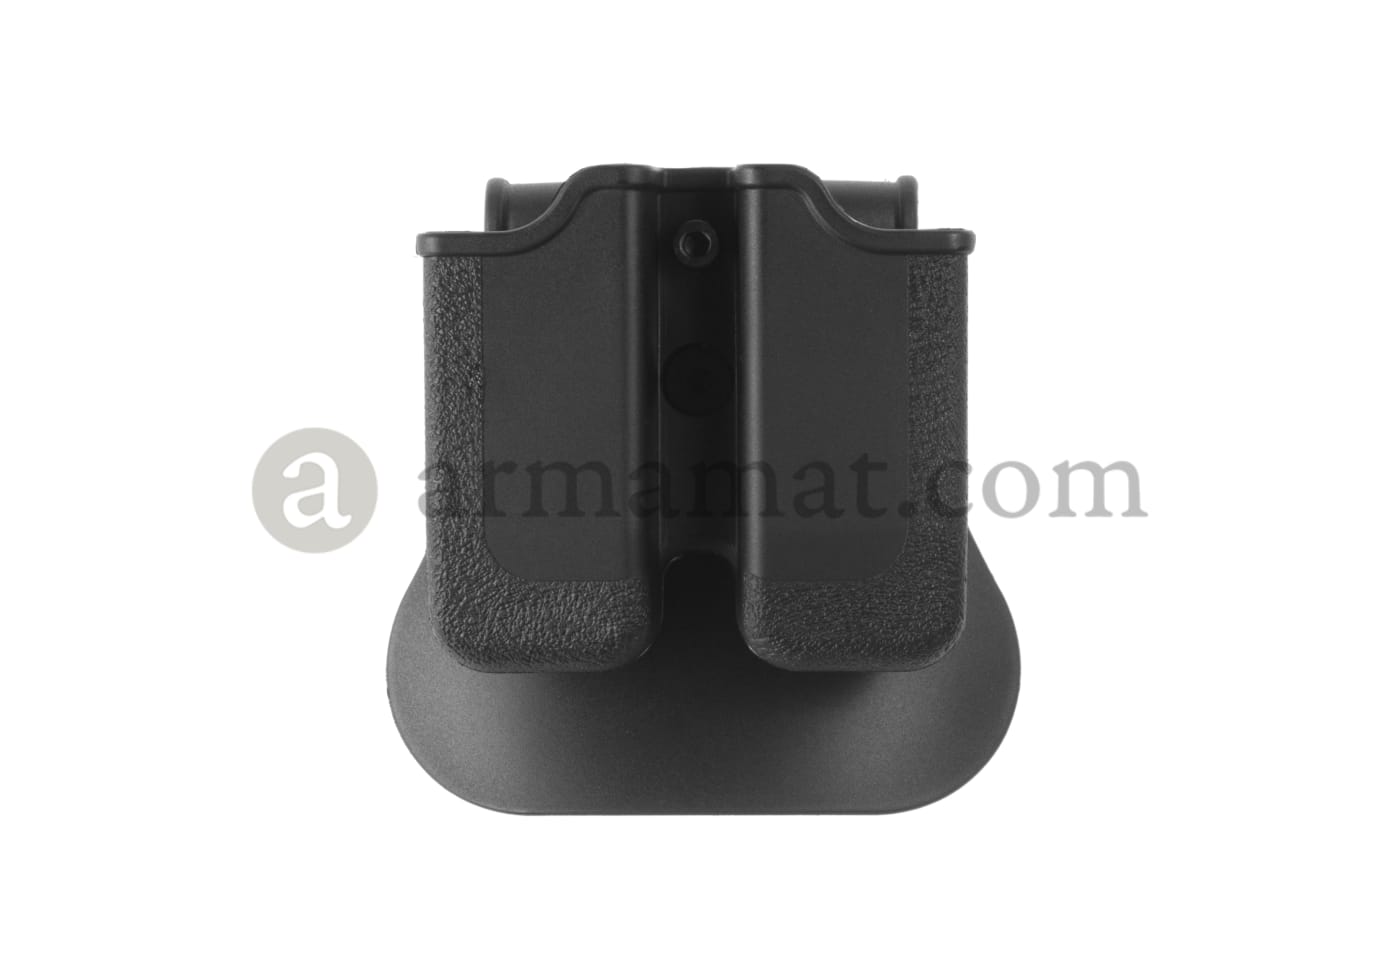 ATS Tactical Gear Single Pistol Mag Pouch